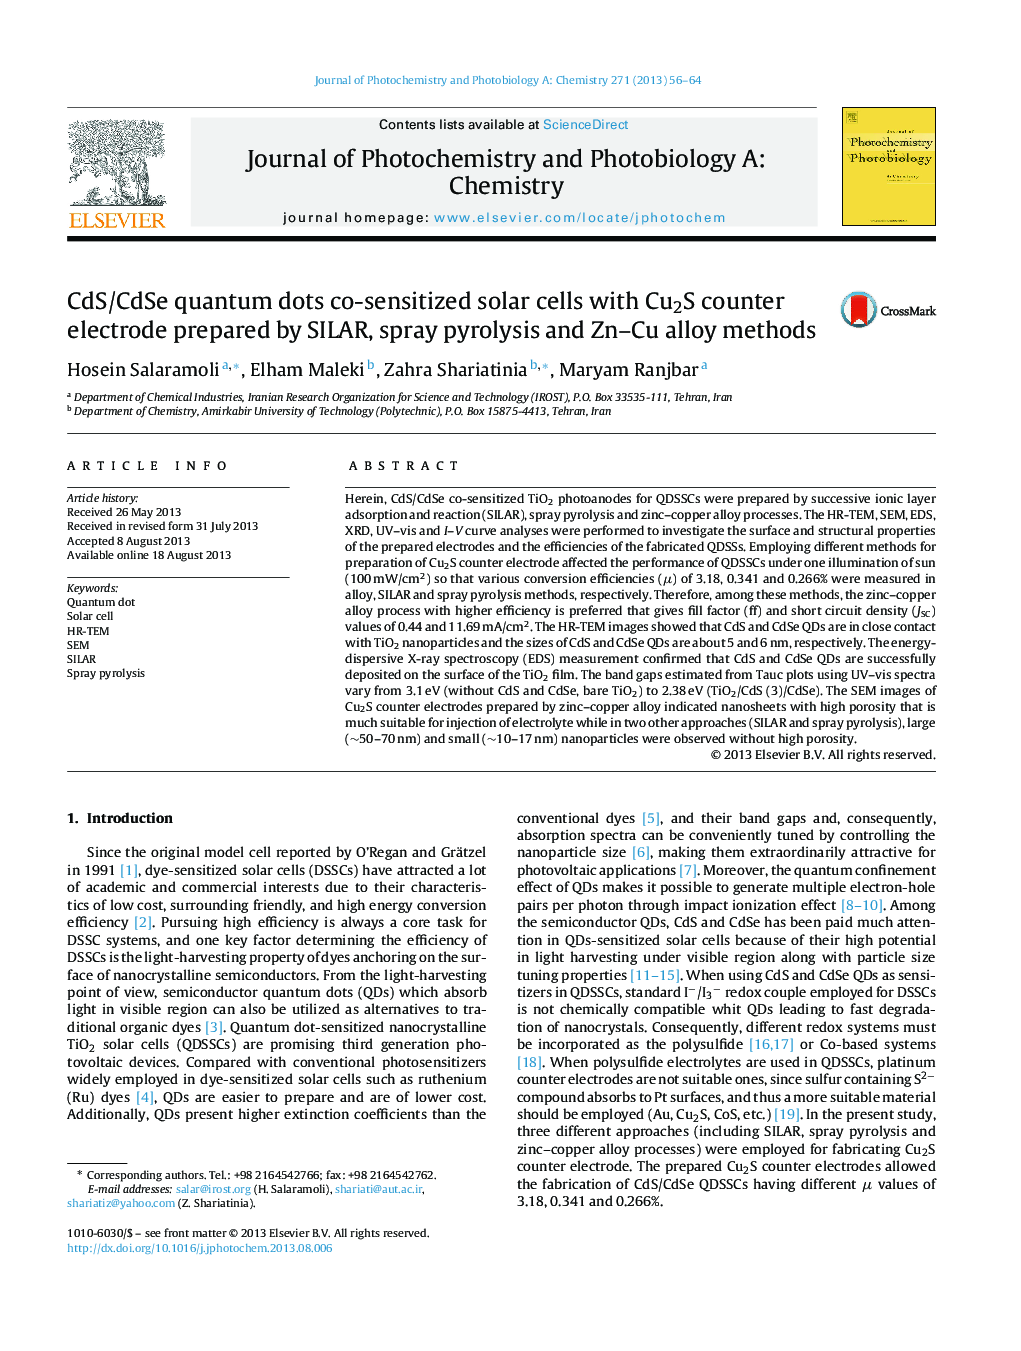 CdS/CdSe quantum dots co-sensitized solar cells with Cu2S counter electrode prepared by SILAR, spray pyrolysis and Zn–Cu alloy methods